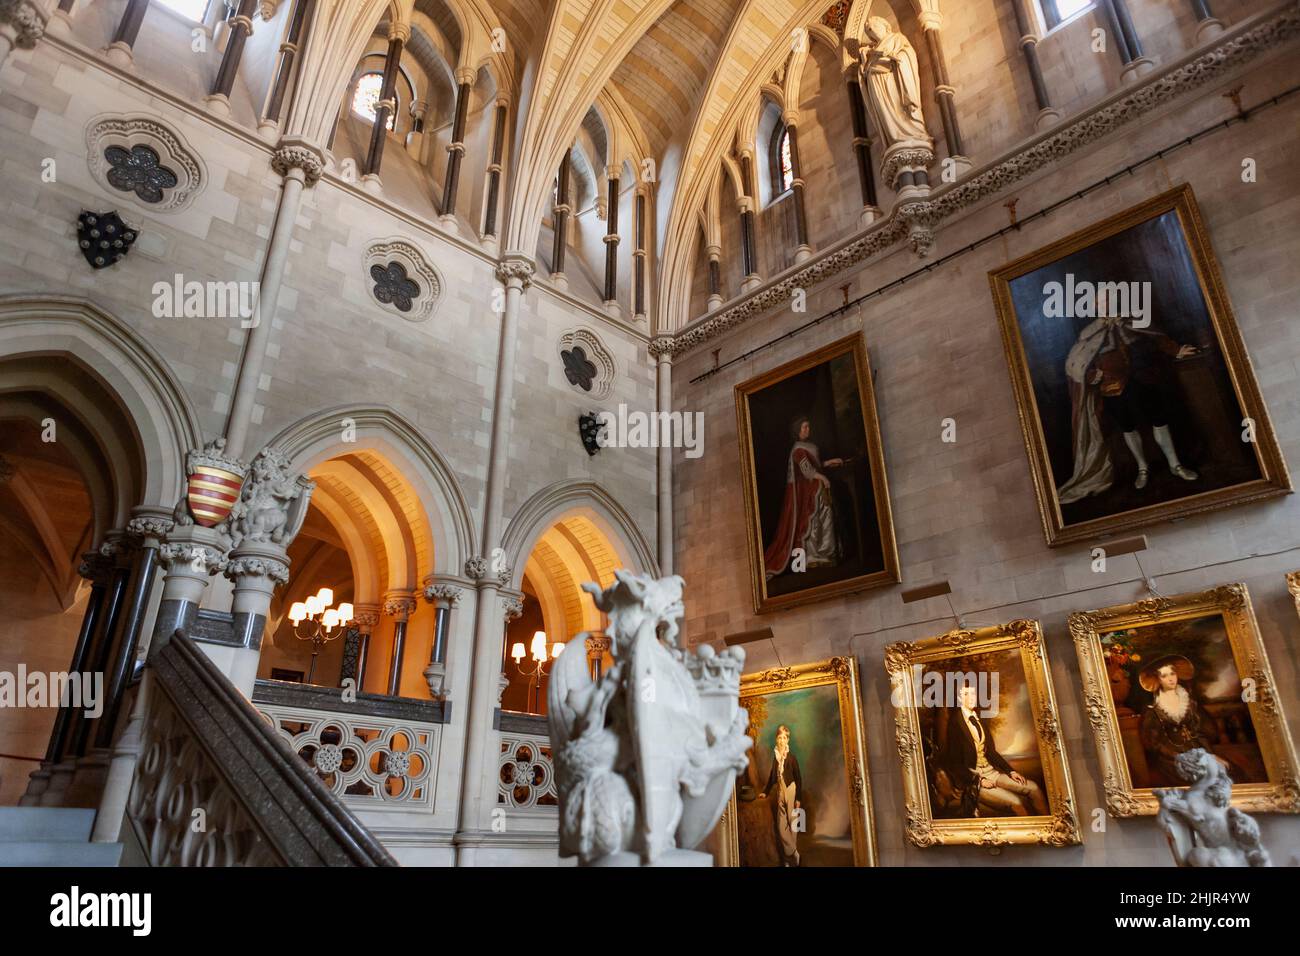 Grand staircase, Arundel Castle, Arundel, West Sussex, UK Stock Photo